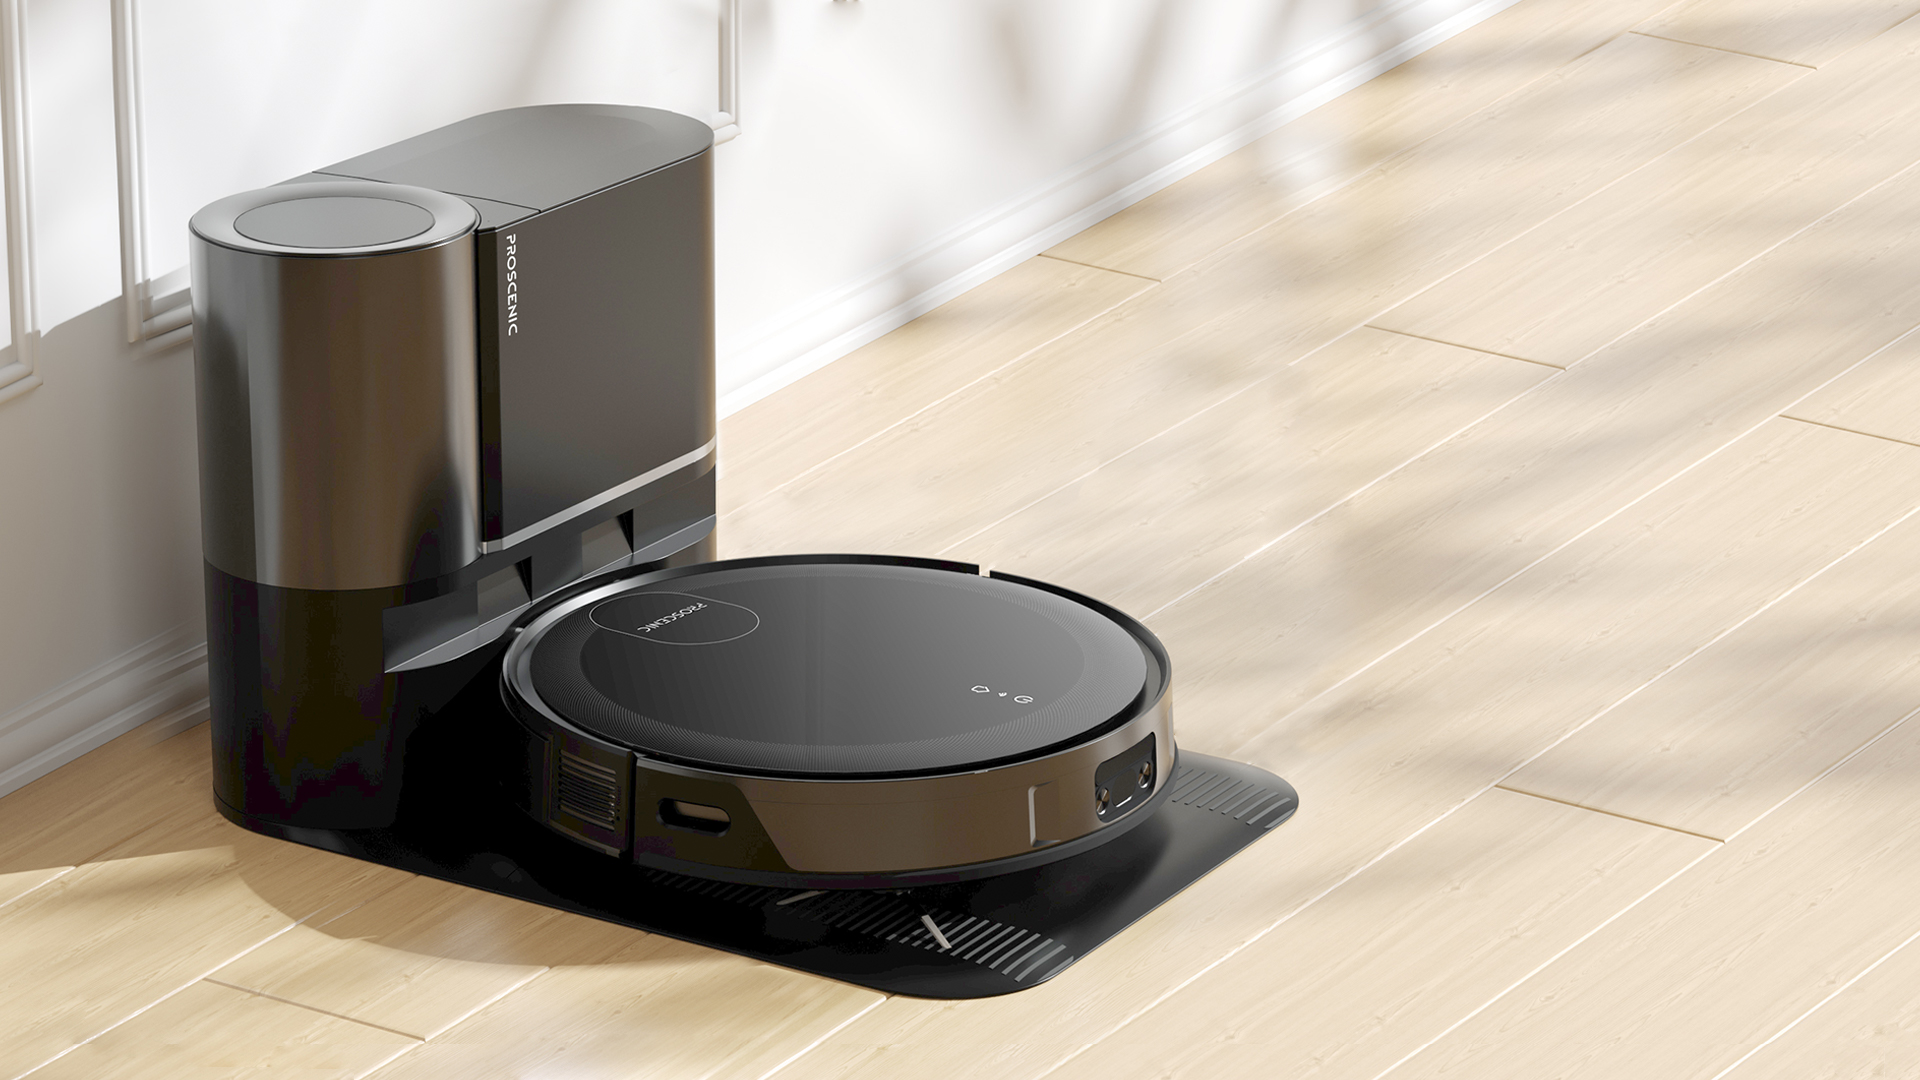 Proscenic X1 Robot Vacuum Cleaner with Self-Empty Base, 3000Pa